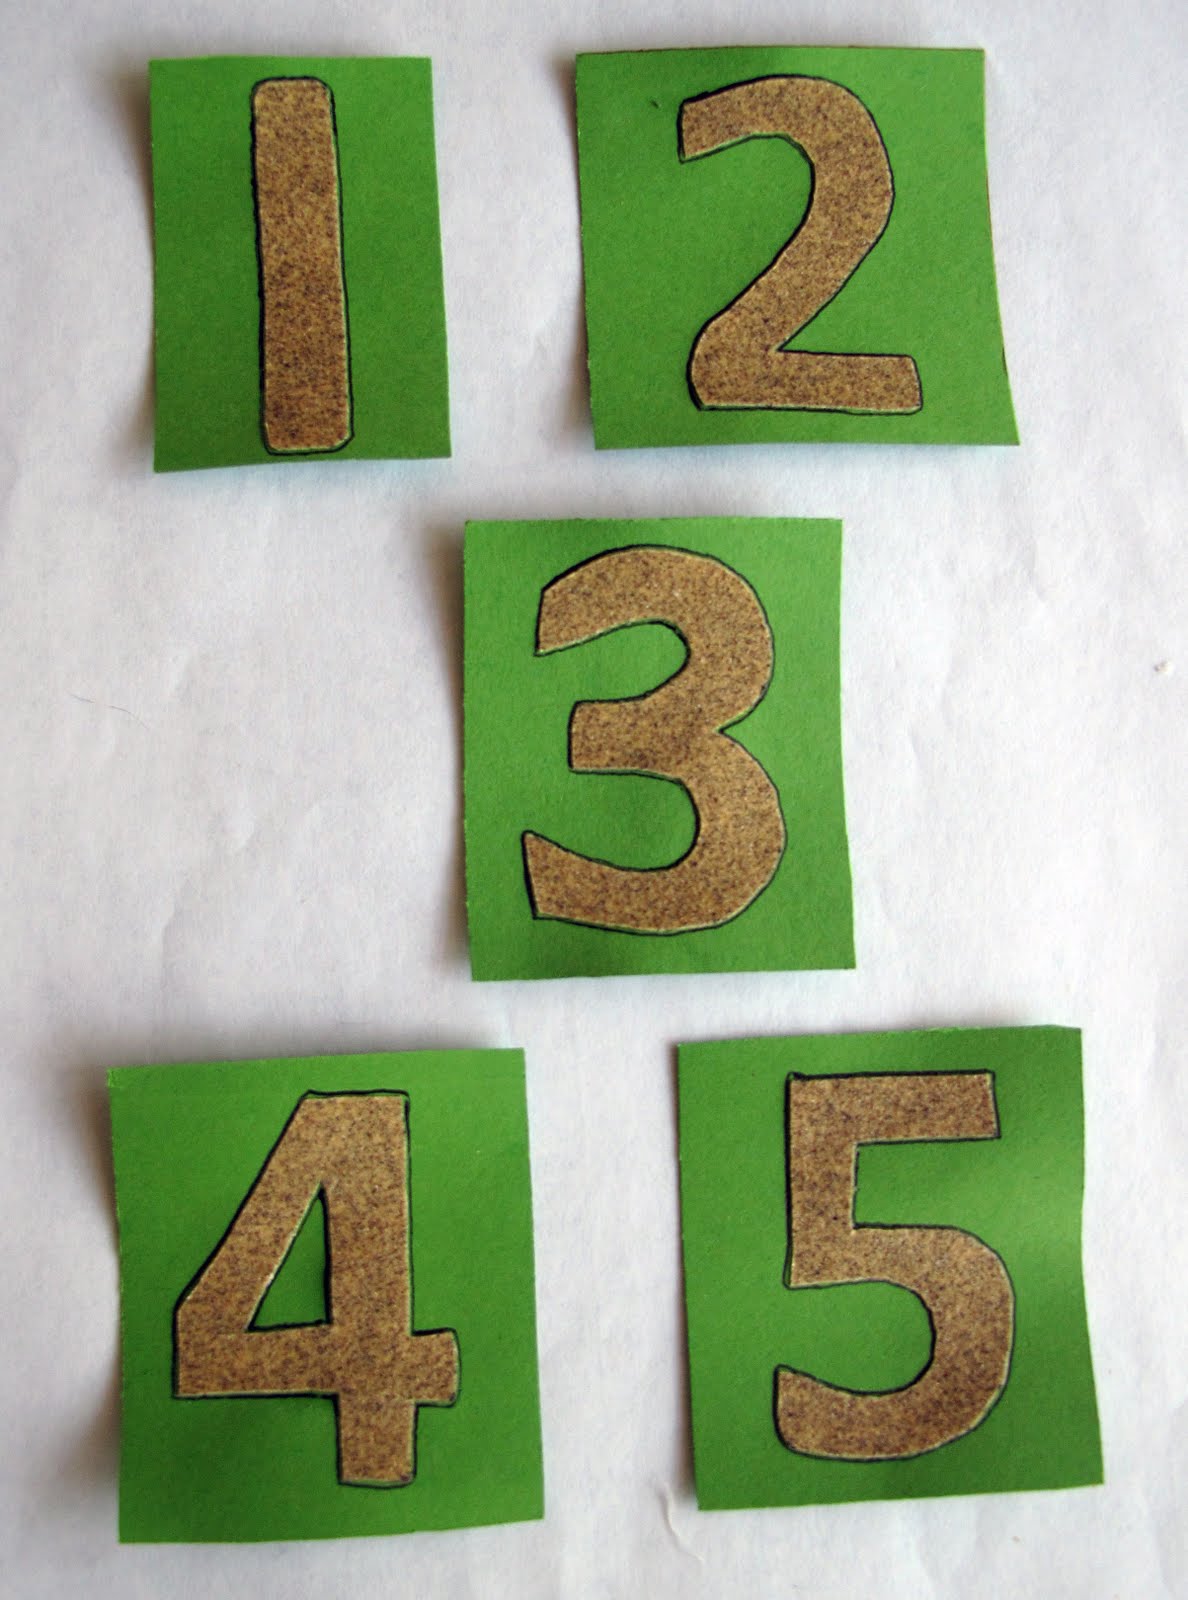 Peaceful Parenting: DIY: Counting Boards with Sandpaper Numerals